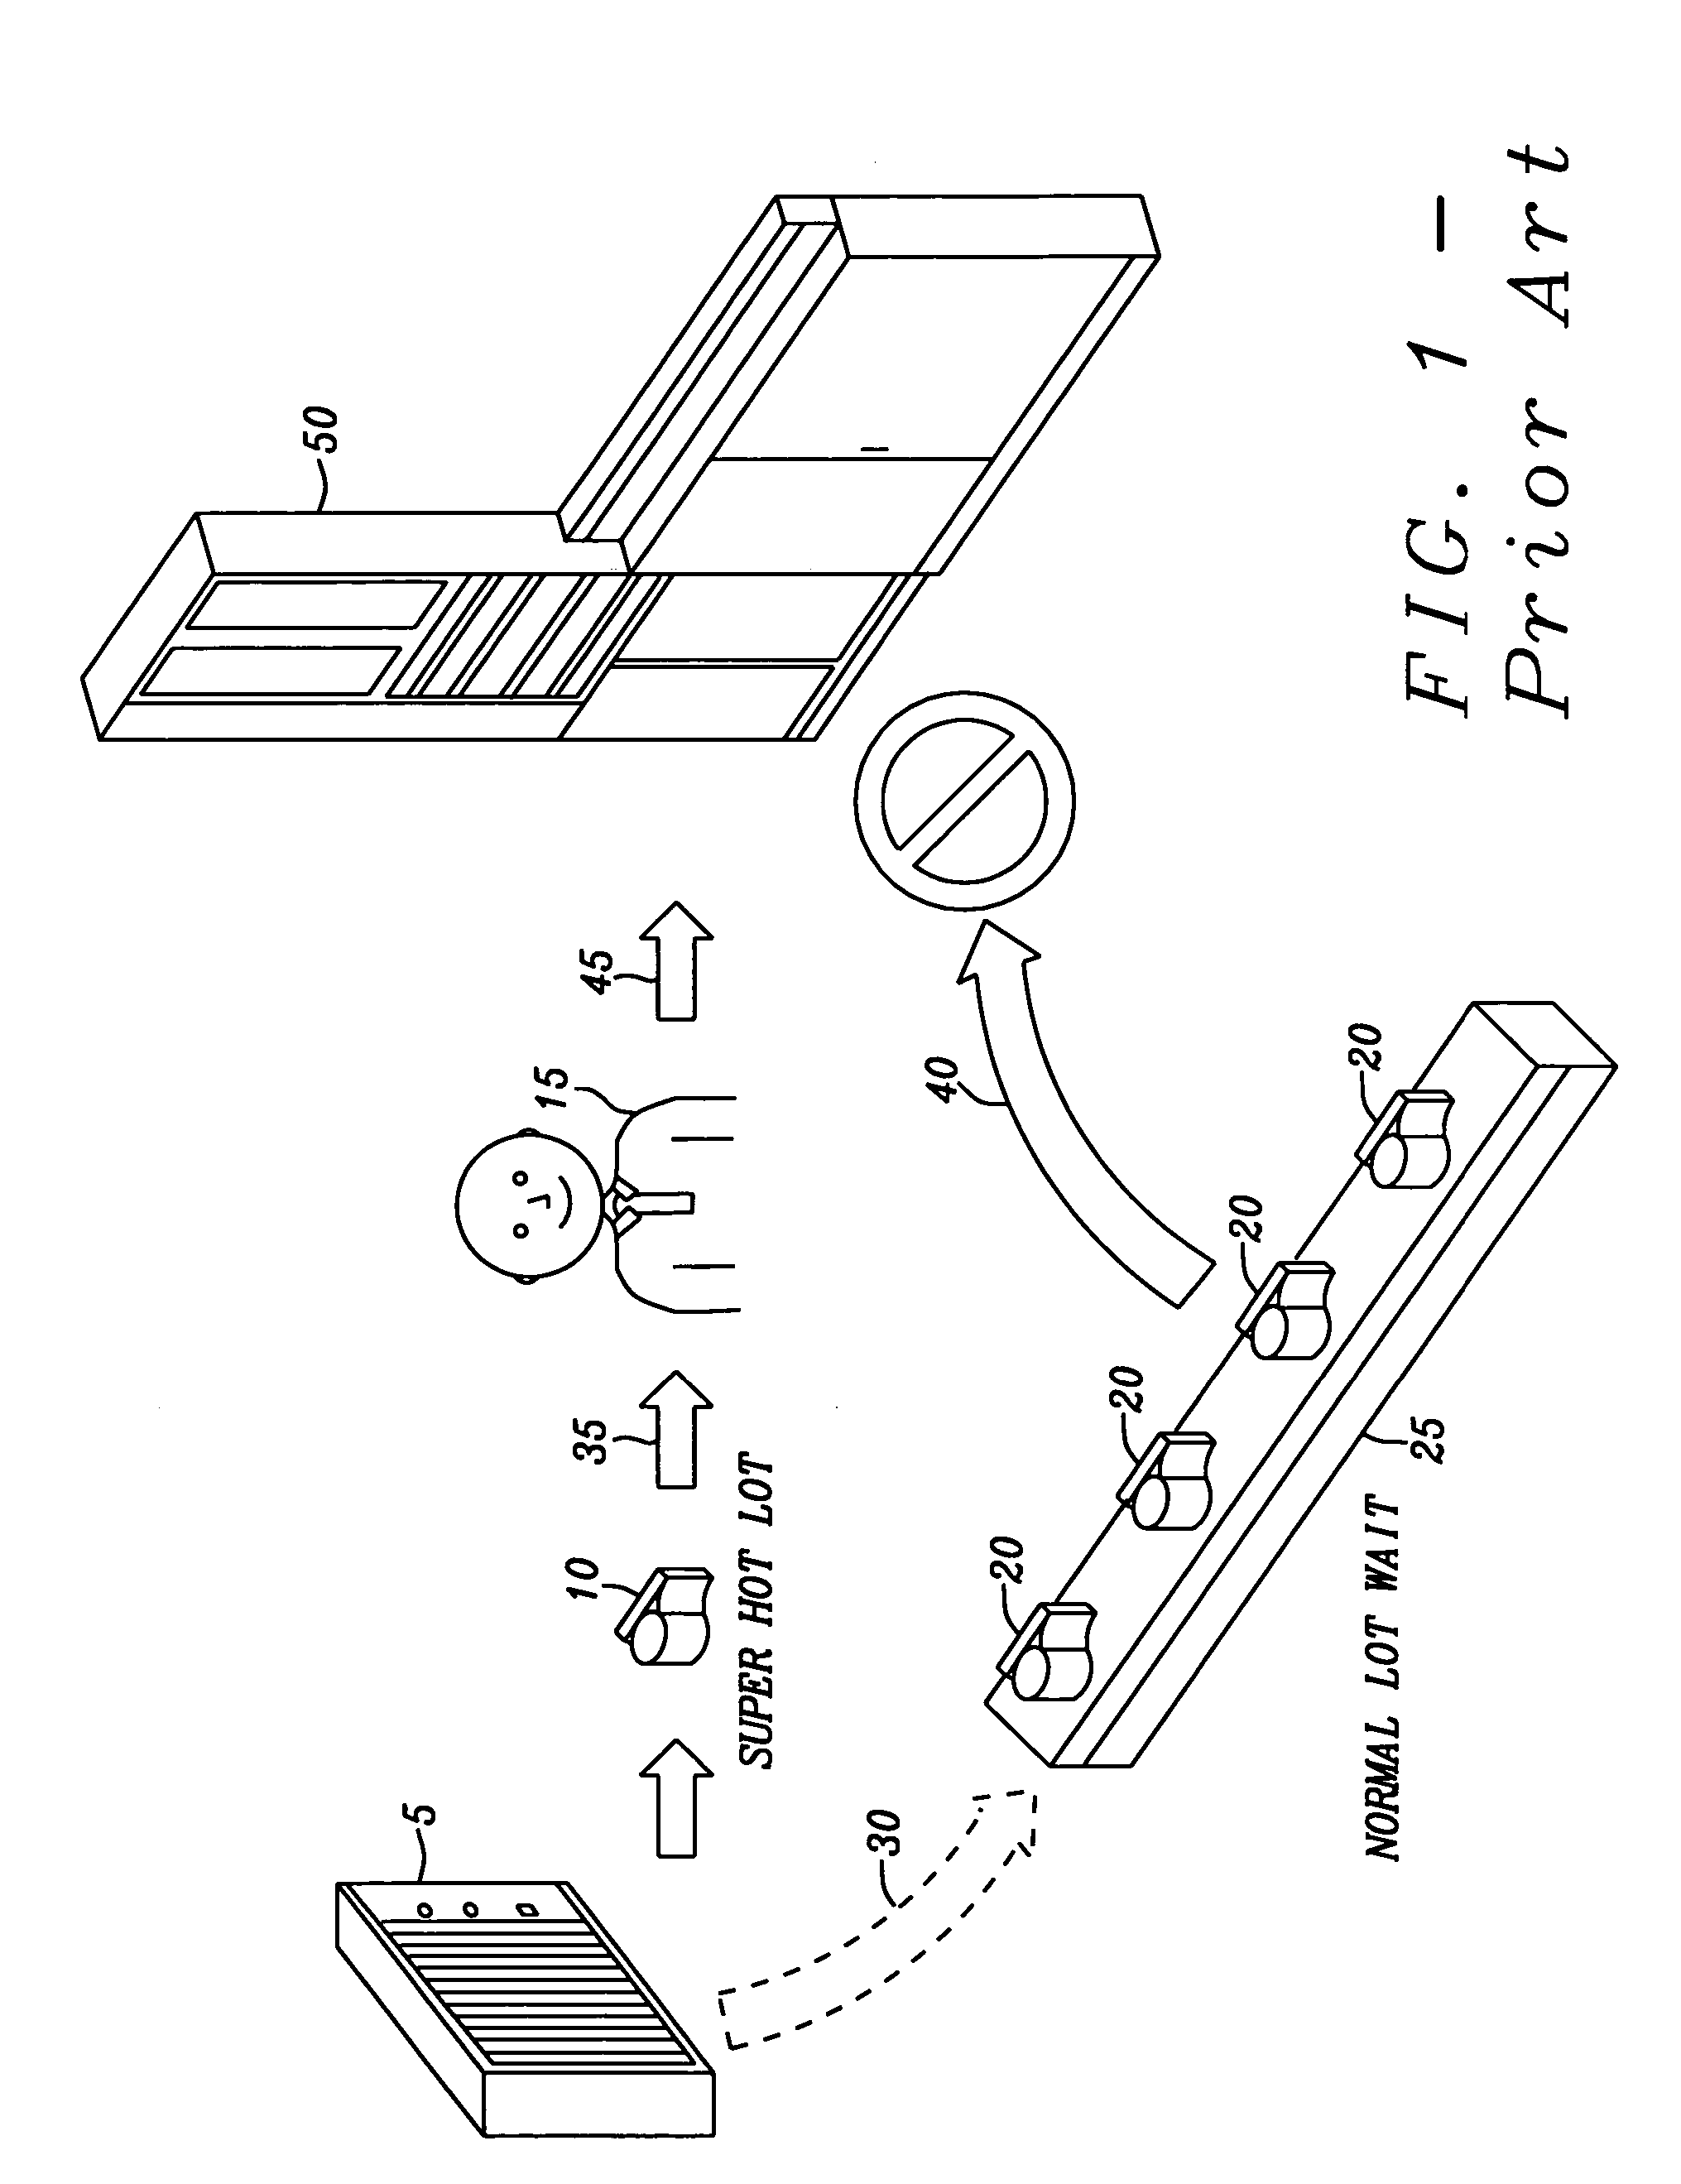 Scheduling system and method for avoiding low equipment utilization